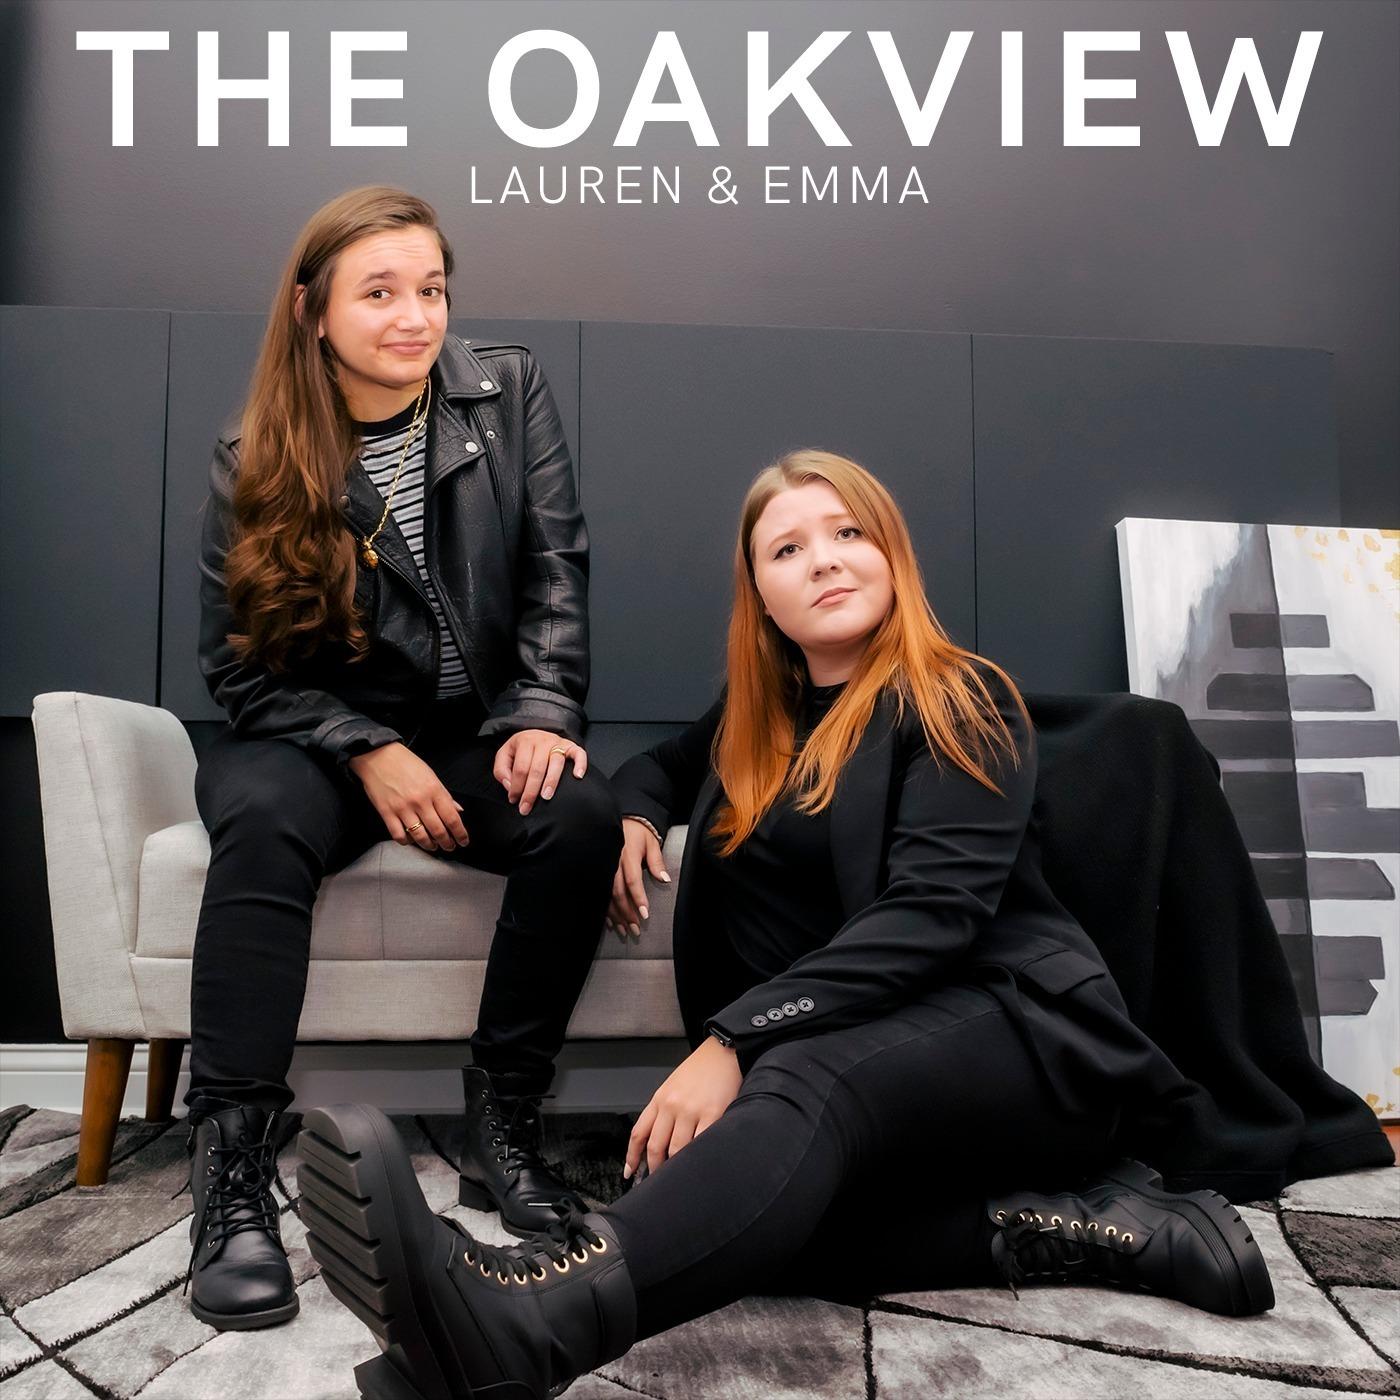 The Oakview